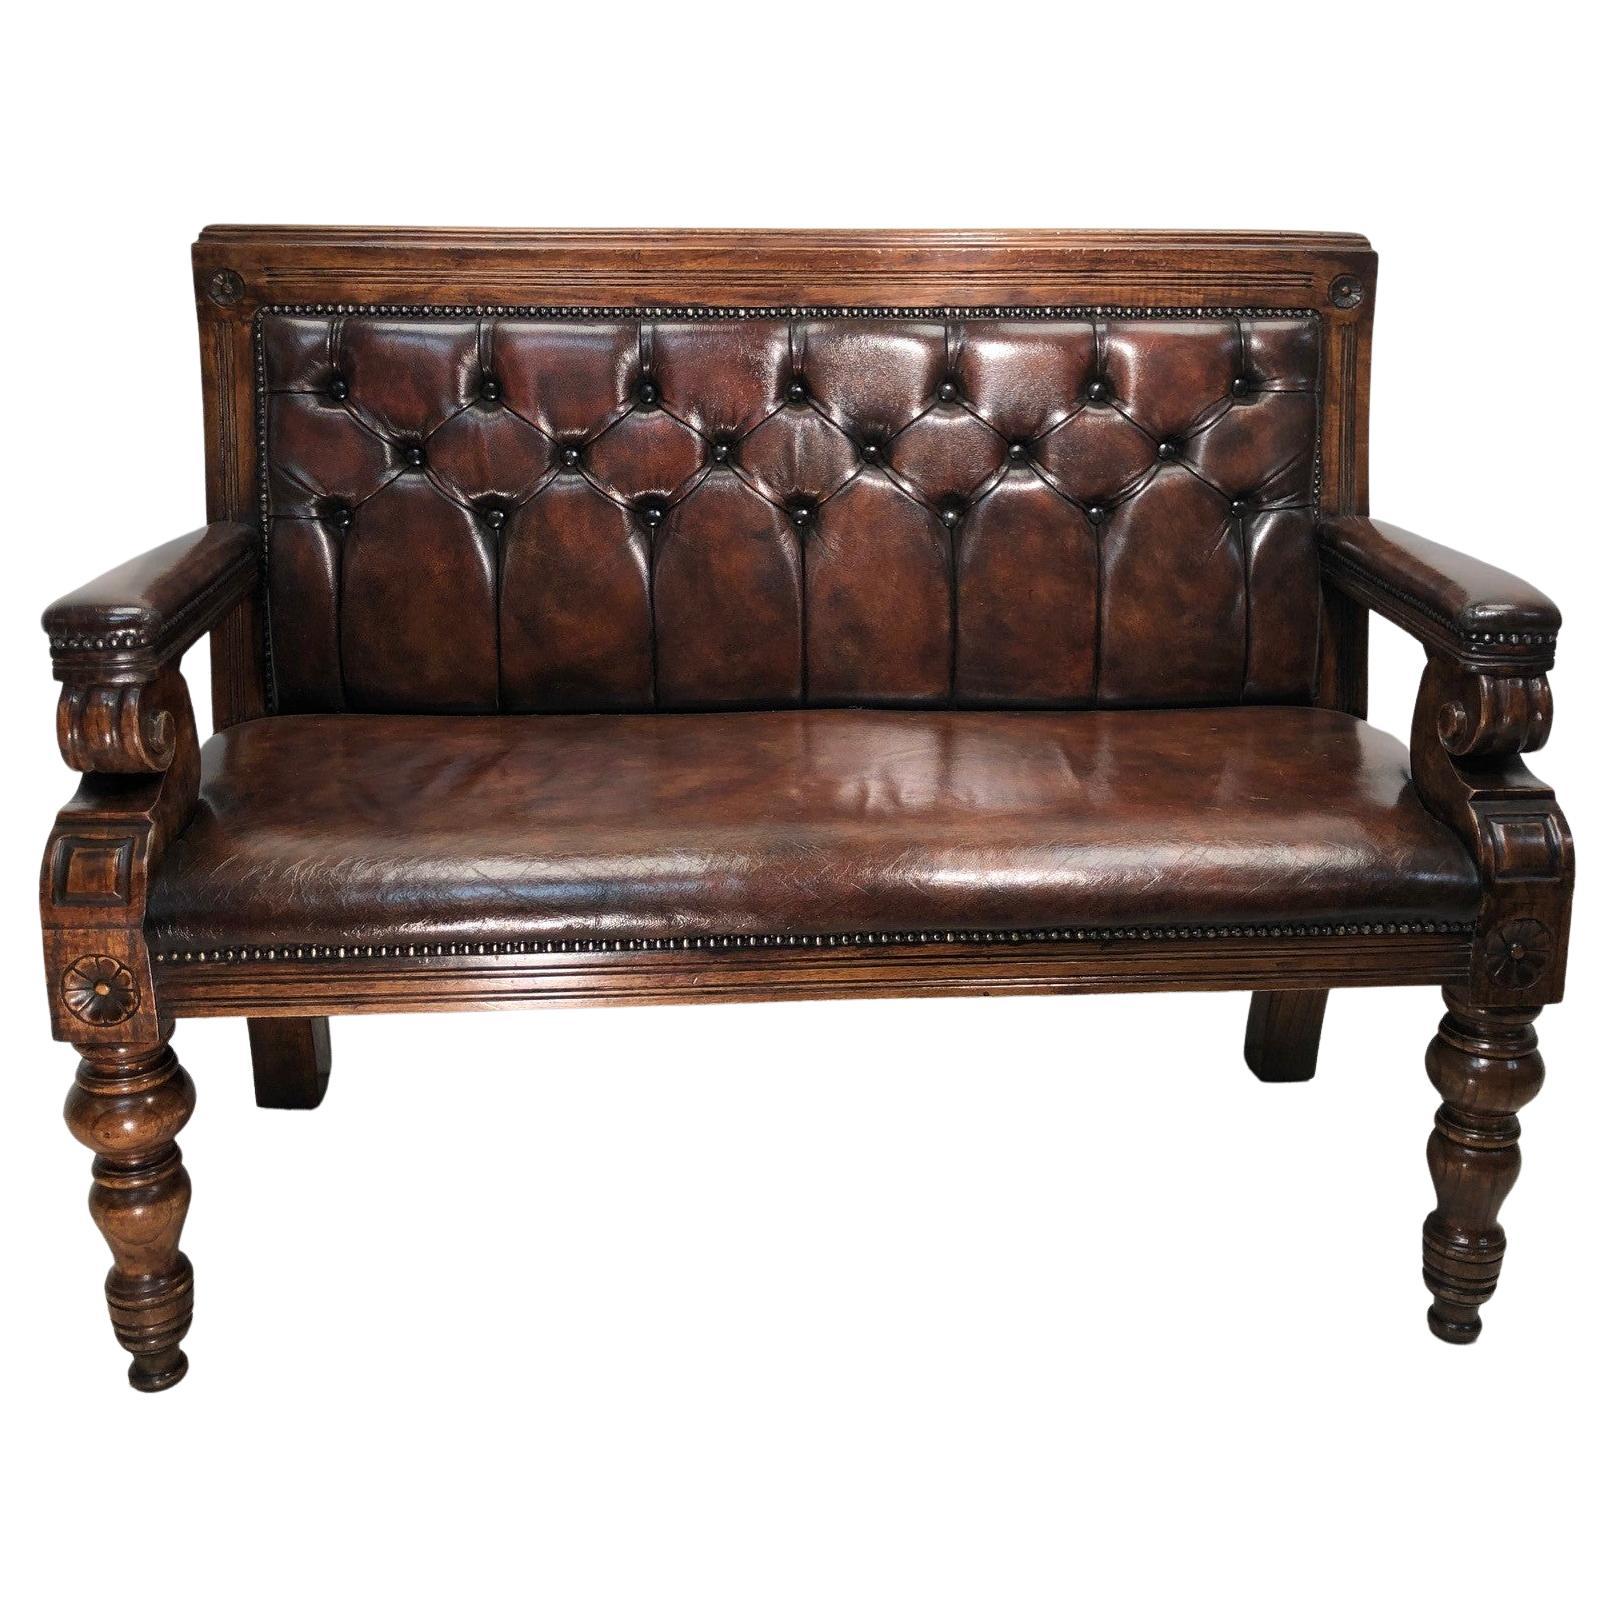 Stunning Antique circa 1900 English Oak & Brown Leather Chesterfield Bench